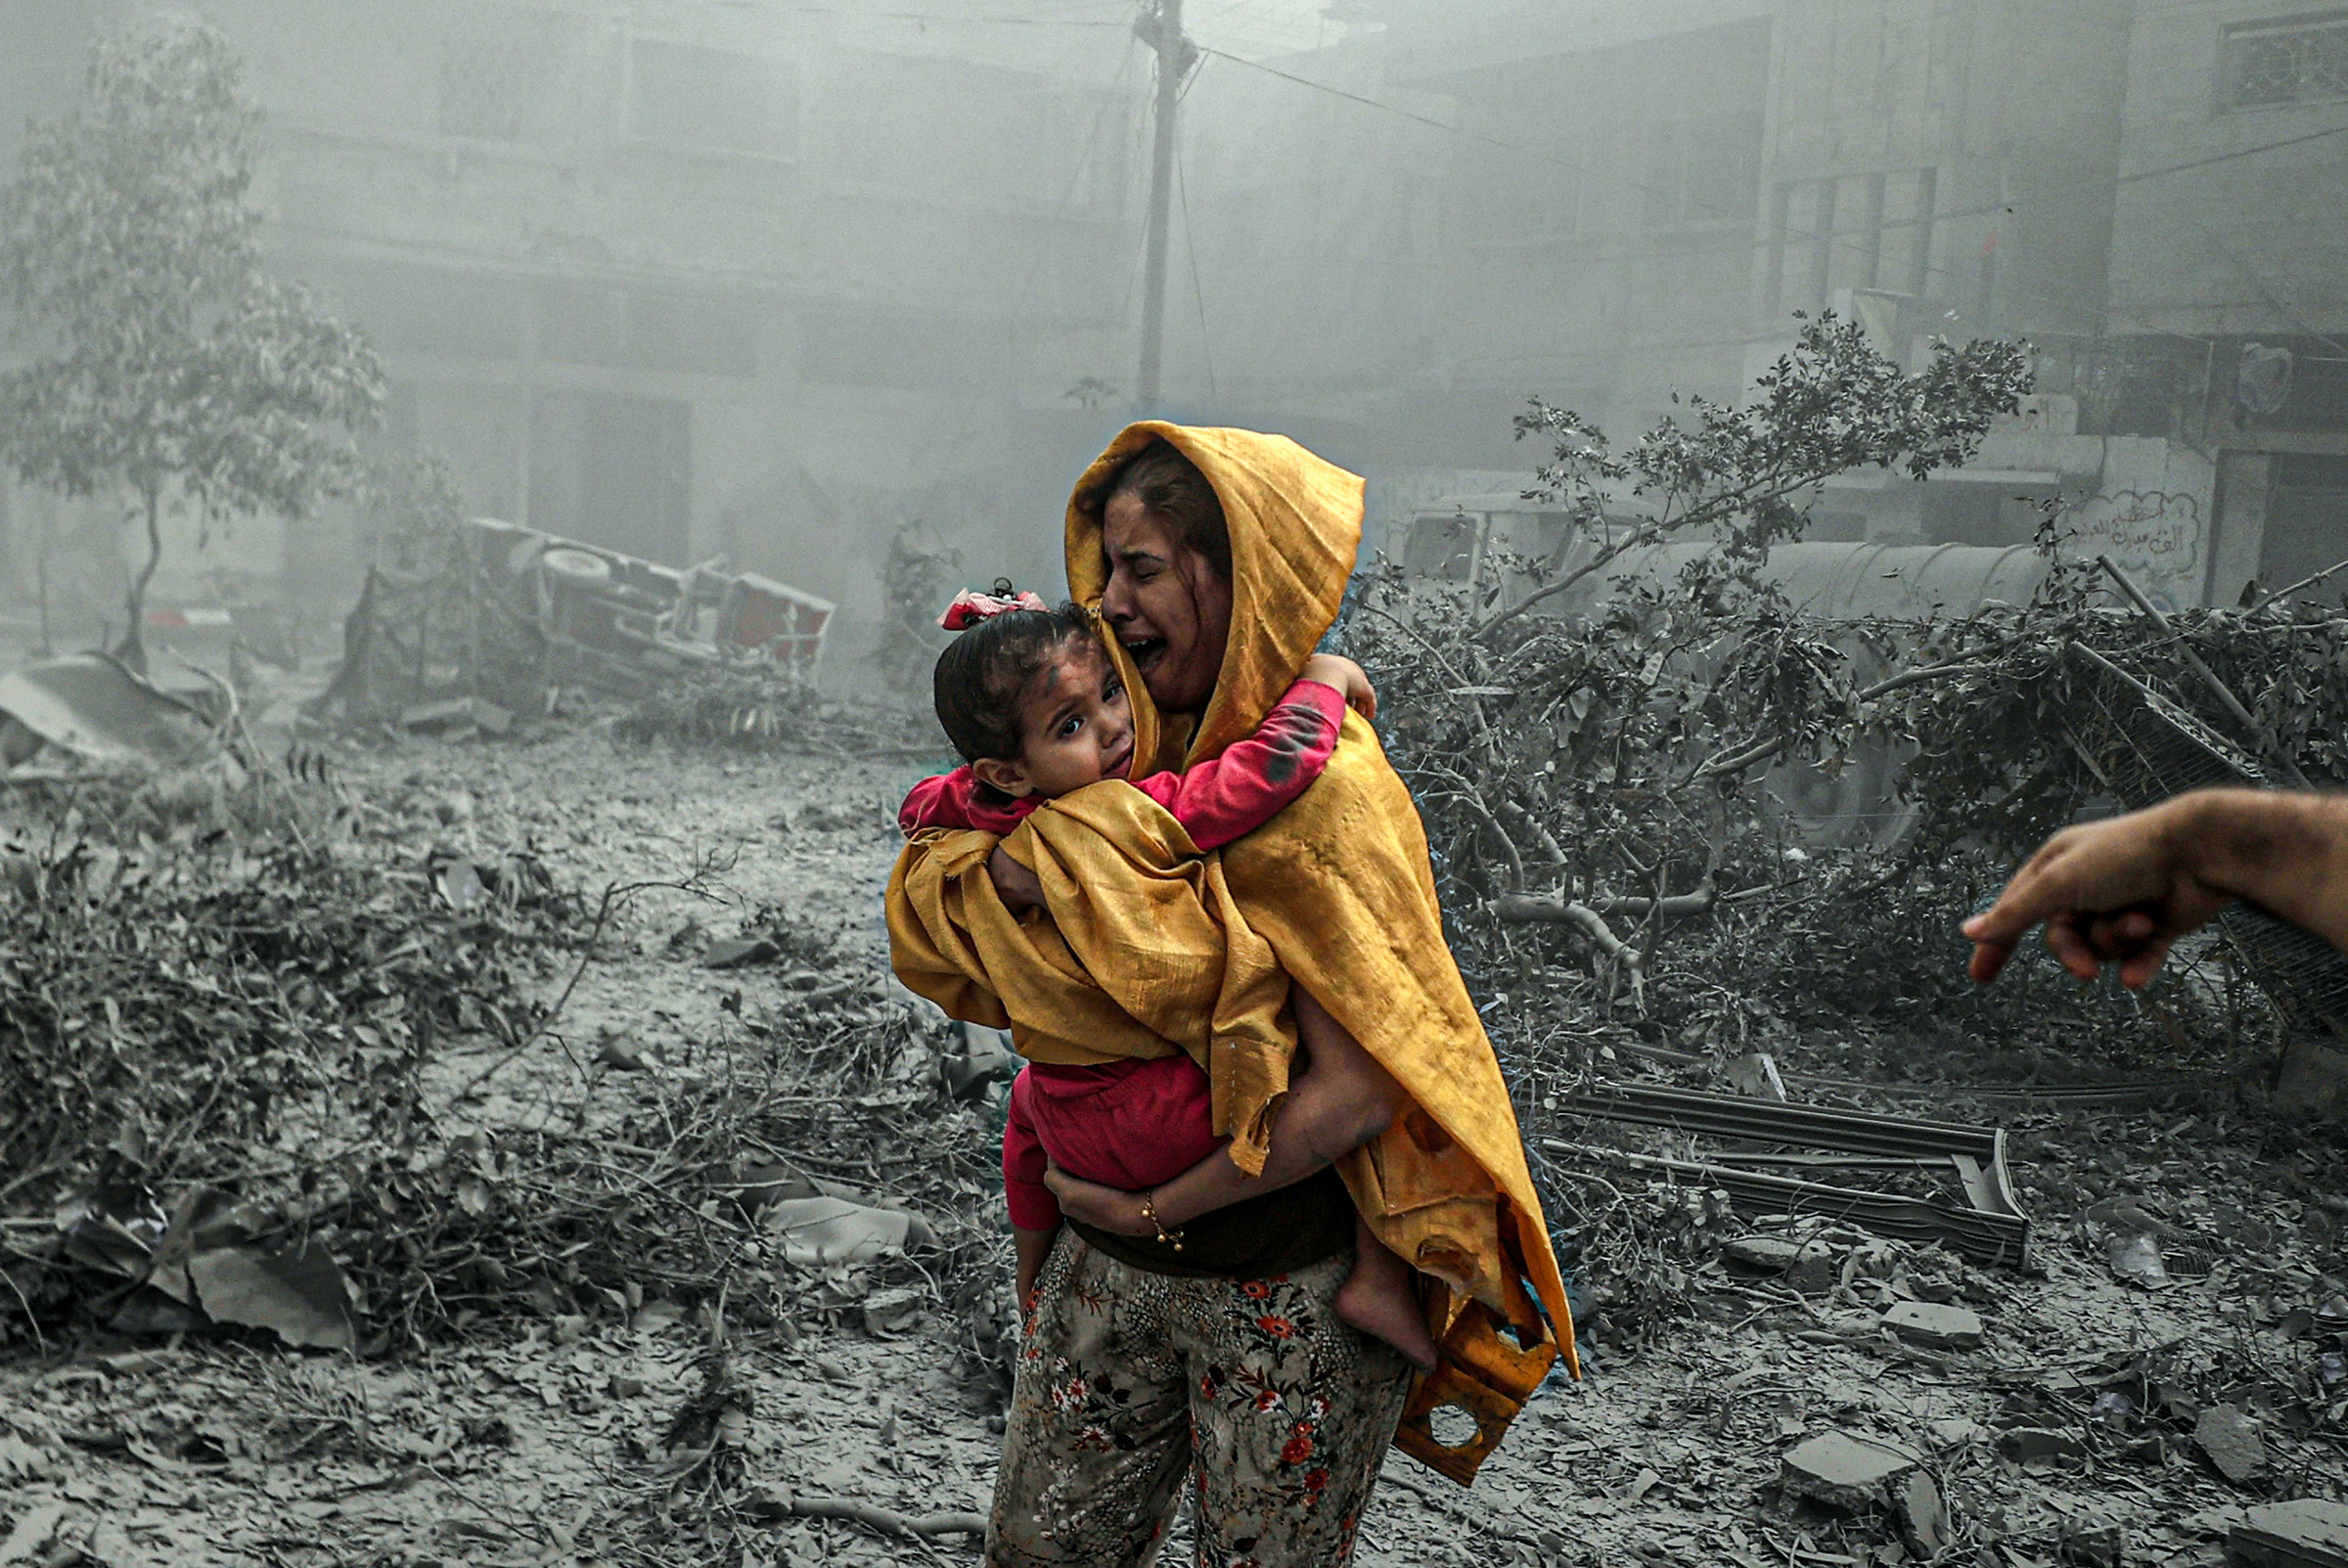 A woman holding a girl reacts after Israeli airstrikes hit Ridwan neighborhood of Gaza City, on Oct. 23.